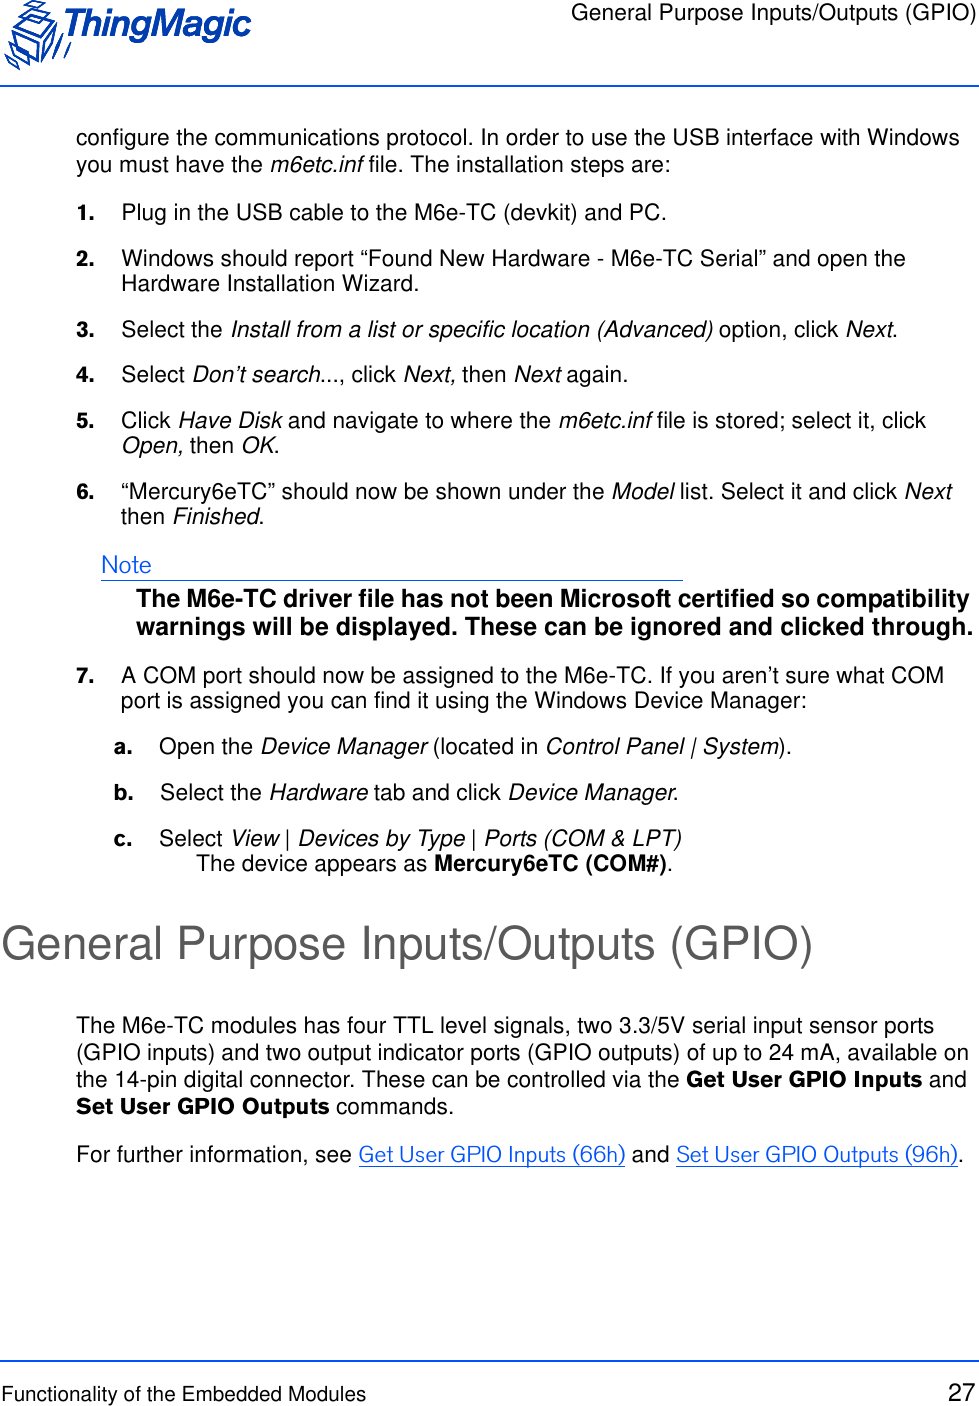 General Purpose Inputs/Outputs (GPIO)Functionality of the Embedded Modules 27configure the communications protocol. In order to use the USB interface with Windows you must have the m6etc.inf file. The installation steps are:1.    Plug in the USB cable to the M6e-TC (devkit) and PC.2.    Windows should report “Found New Hardware - M6e-TC Serial” and open the Hardware Installation Wizard.3.    Select the Install from a list or specific location (Advanced) option, click Next.4.    Select Don’t search..., click Next, then Next again.5.    Click Have Disk and navigate to where the m6etc.inf file is stored; select it, click Open, then OK.6.    “Mercury6eTC” should now be shown under the Model list. Select it and click Next then Finished. NoteThe M6e-TC driver file has not been Microsoft certified so compatibility warnings will be displayed. These can be ignored and clicked through.7.    A COM port should now be assigned to the M6e-TC. If you aren’t sure what COM port is assigned you can find it using the Windows Device Manager:a.    Open the Device Manager (located in Control Panel | System).b.    Select the Hardware tab and click Device Manager.c.    Select View | Devices by Type | Ports (COM &amp; LPT)The device appears as Mercury6eTC (COM#). General Purpose Inputs/Outputs (GPIO)The M6e-TC modules has four TTL level signals, two 3.3/5V serial input sensor ports (GPIO inputs) and two output indicator ports (GPIO outputs) of up to 24 mA, available on the 14-pin digital connector. These can be controlled via the Get User GPIO Inputs and Set User GPIO Outputs commands.For further information, see Get User GPIO Inputs (66h) and Set User GPIO Outputs (96h).